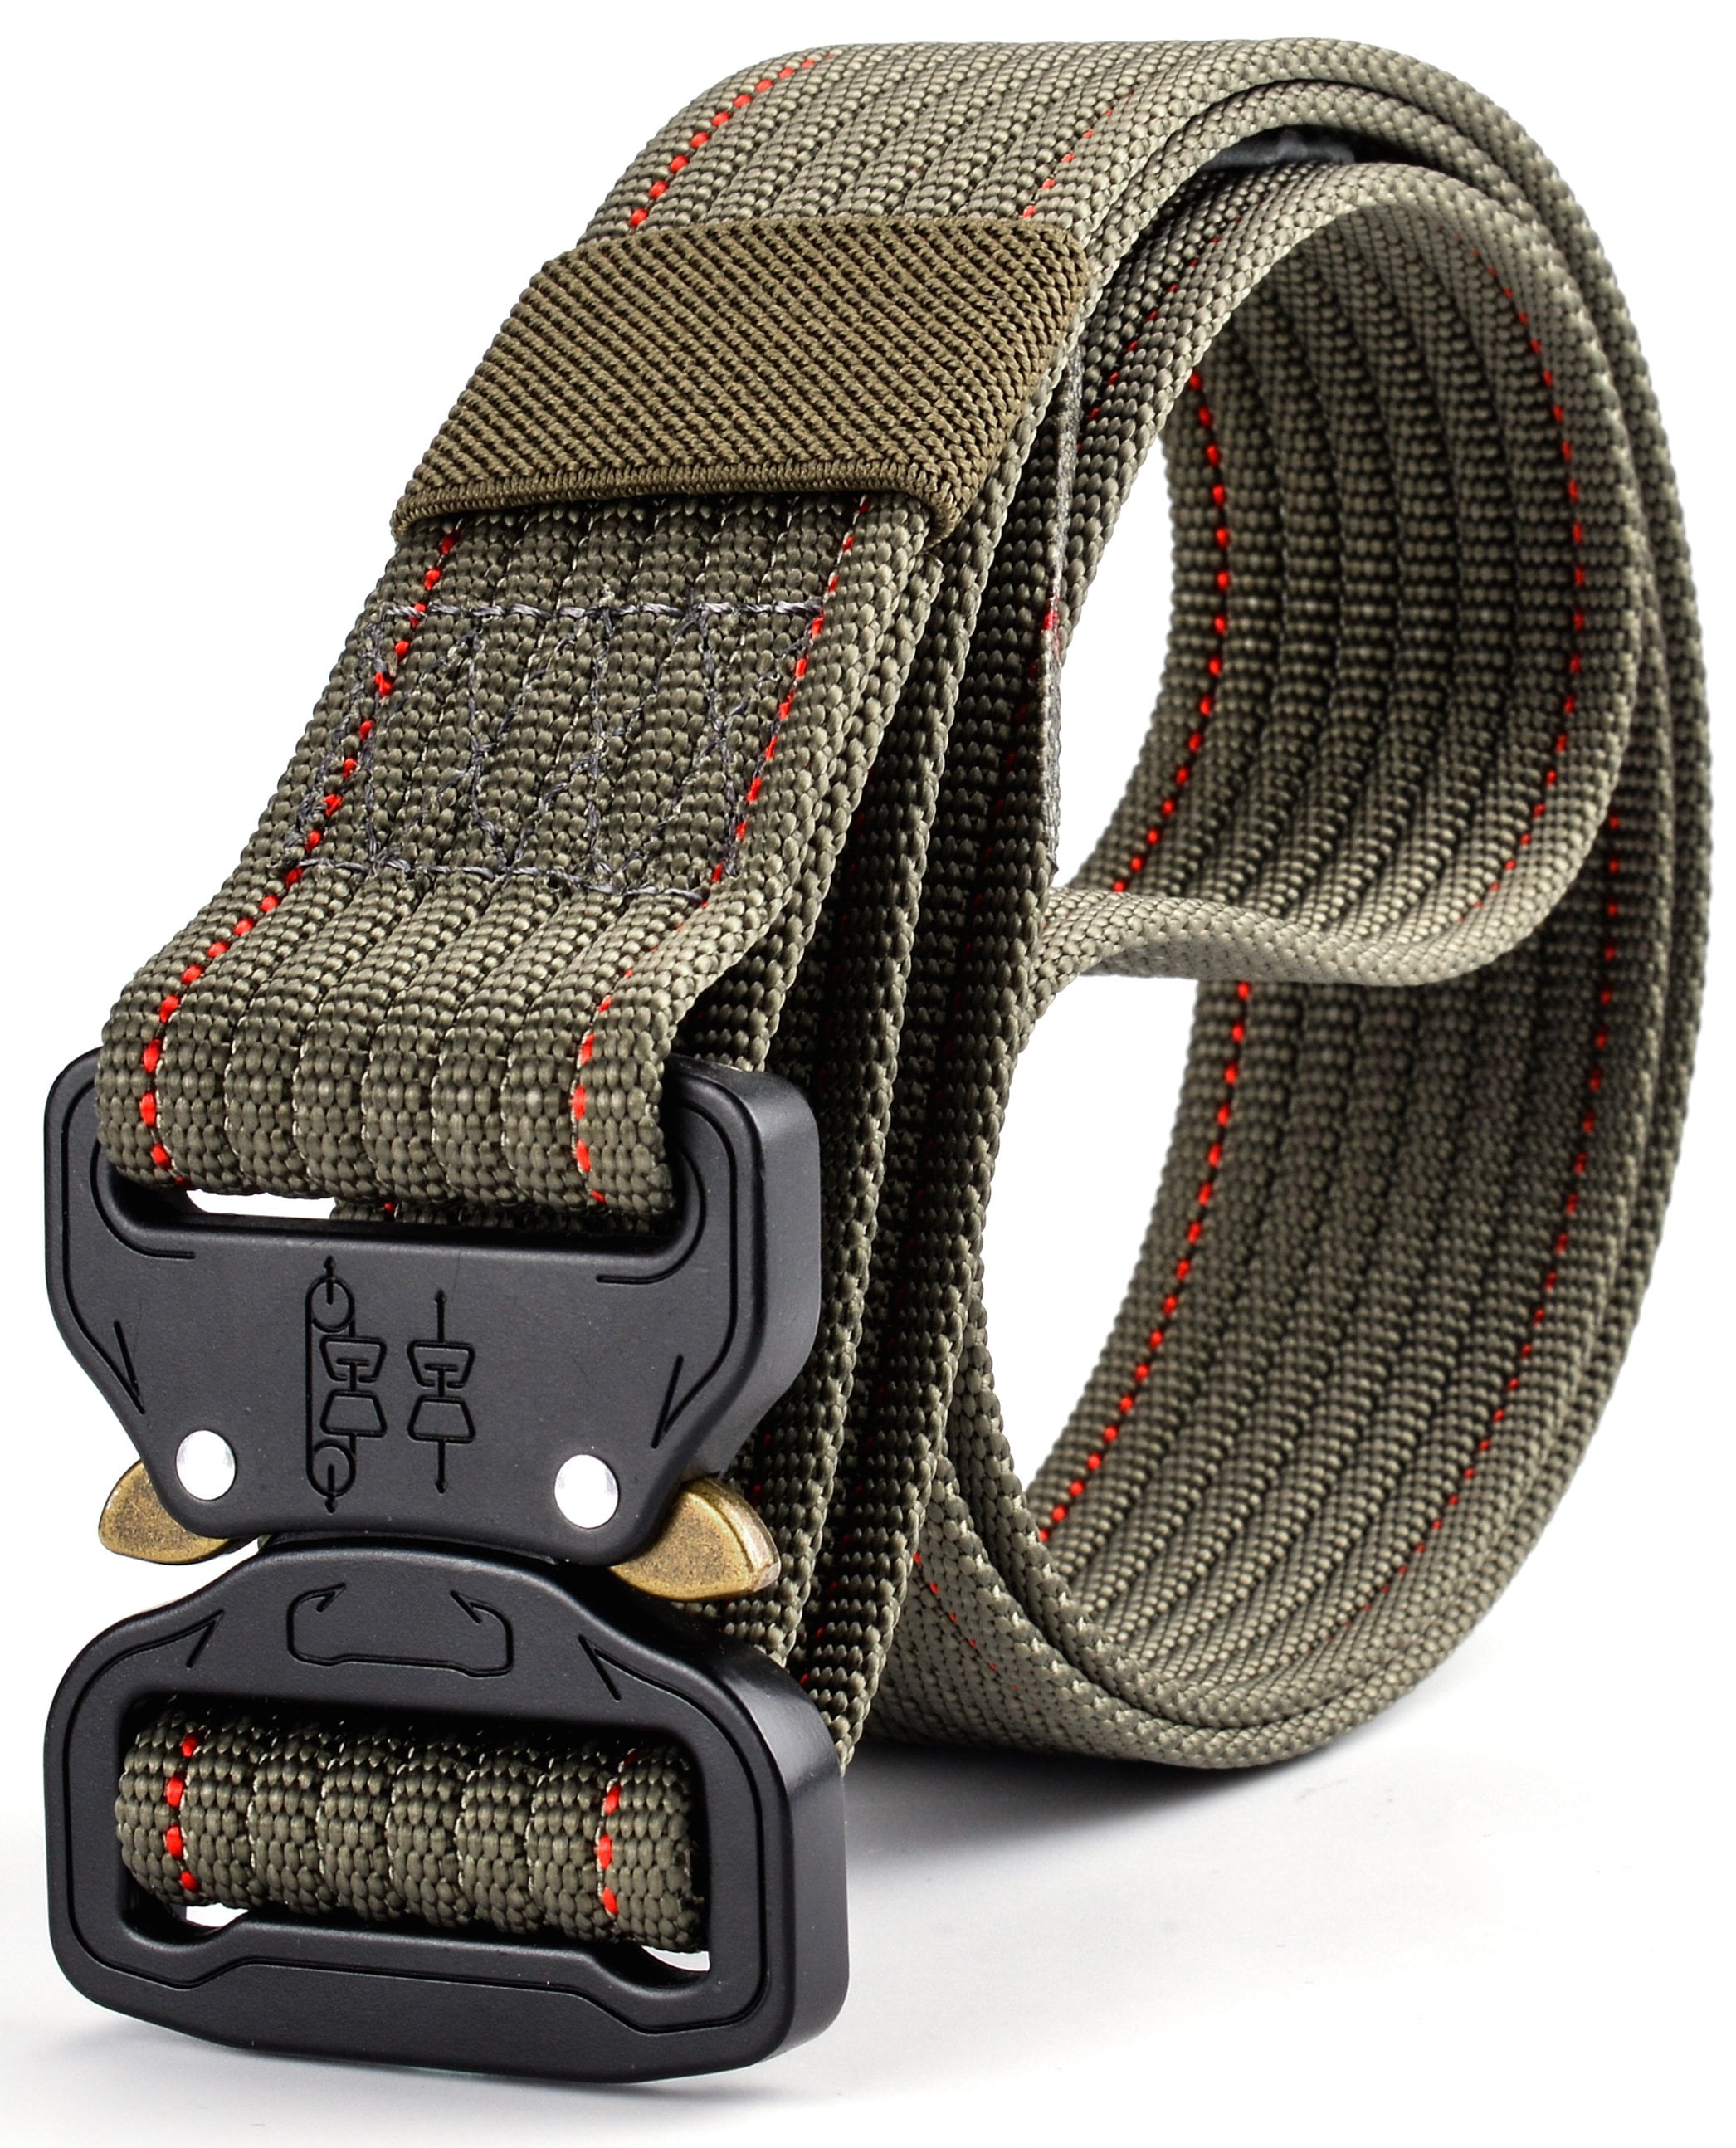 Details about   Tactical Military Waist Nylon Rigger Belt Training With Metal Buckle Heavy Duty 